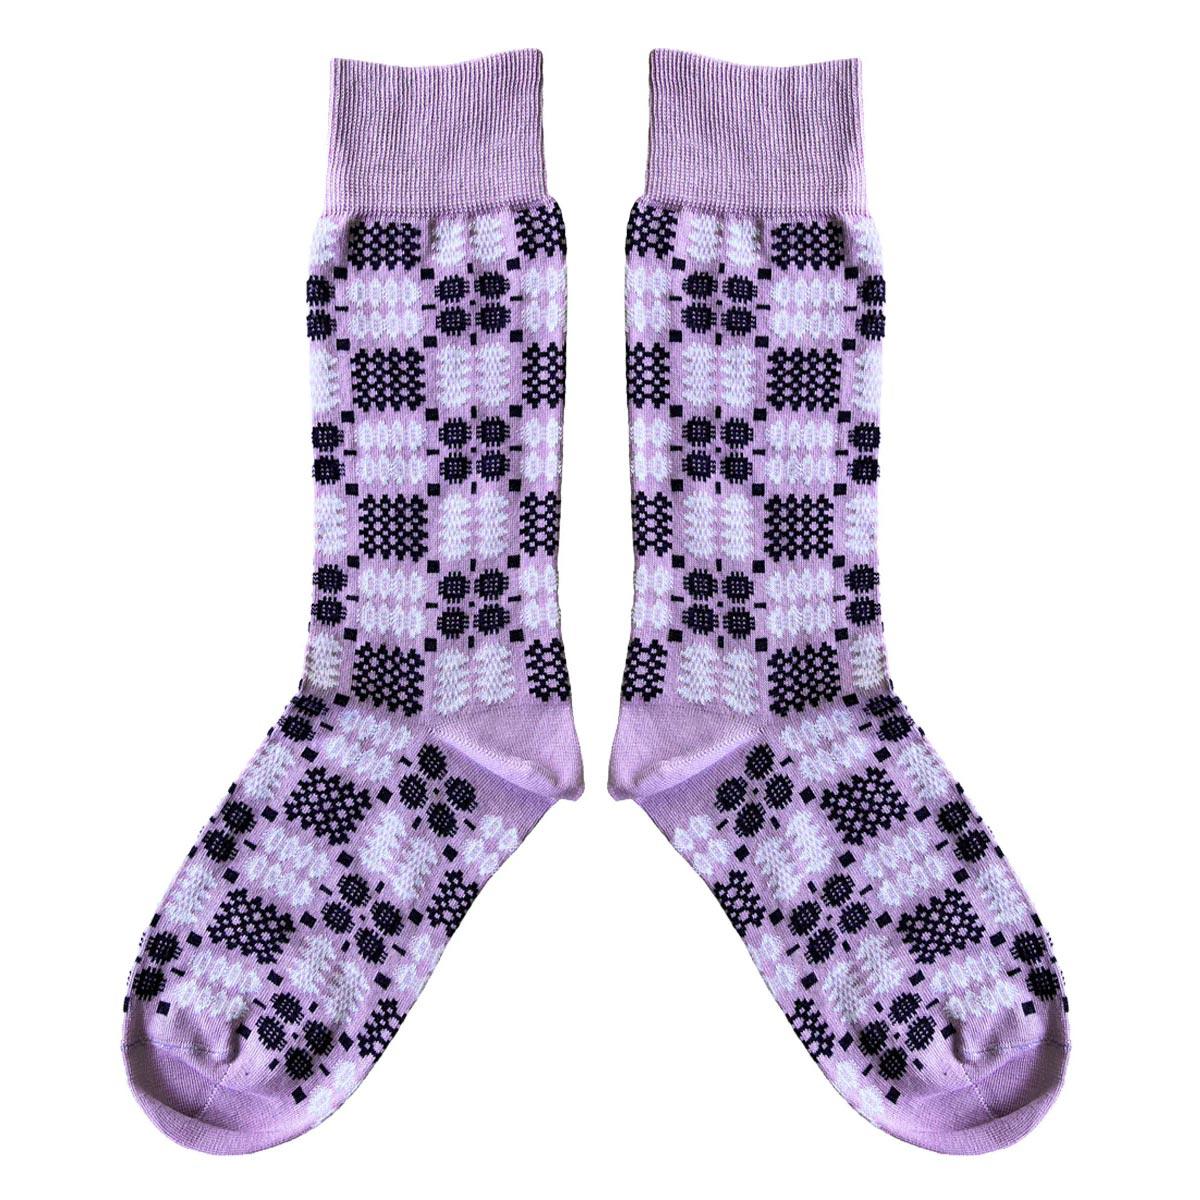 Socks - Mabli Carthen / Welsh Tapestry - Adults Unisex - Orchid / Lilac